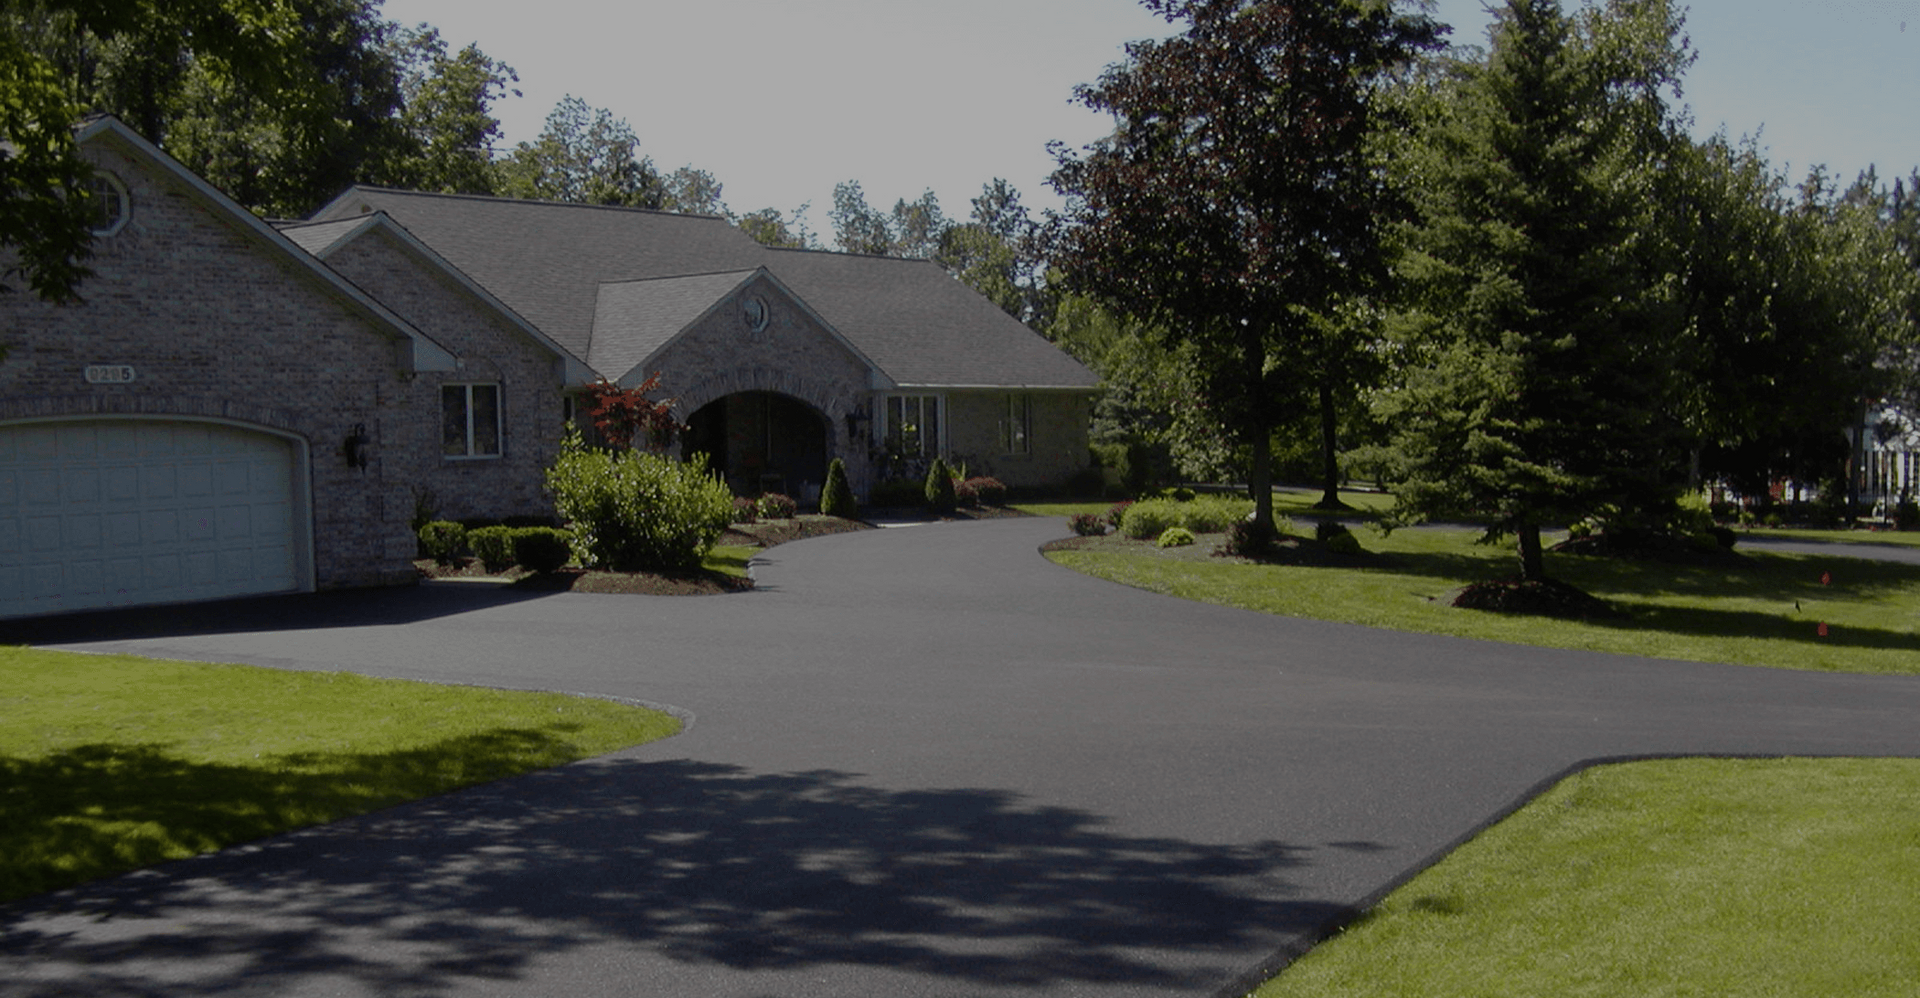 Home Featuring Blacktop Driveway in Alden, NY